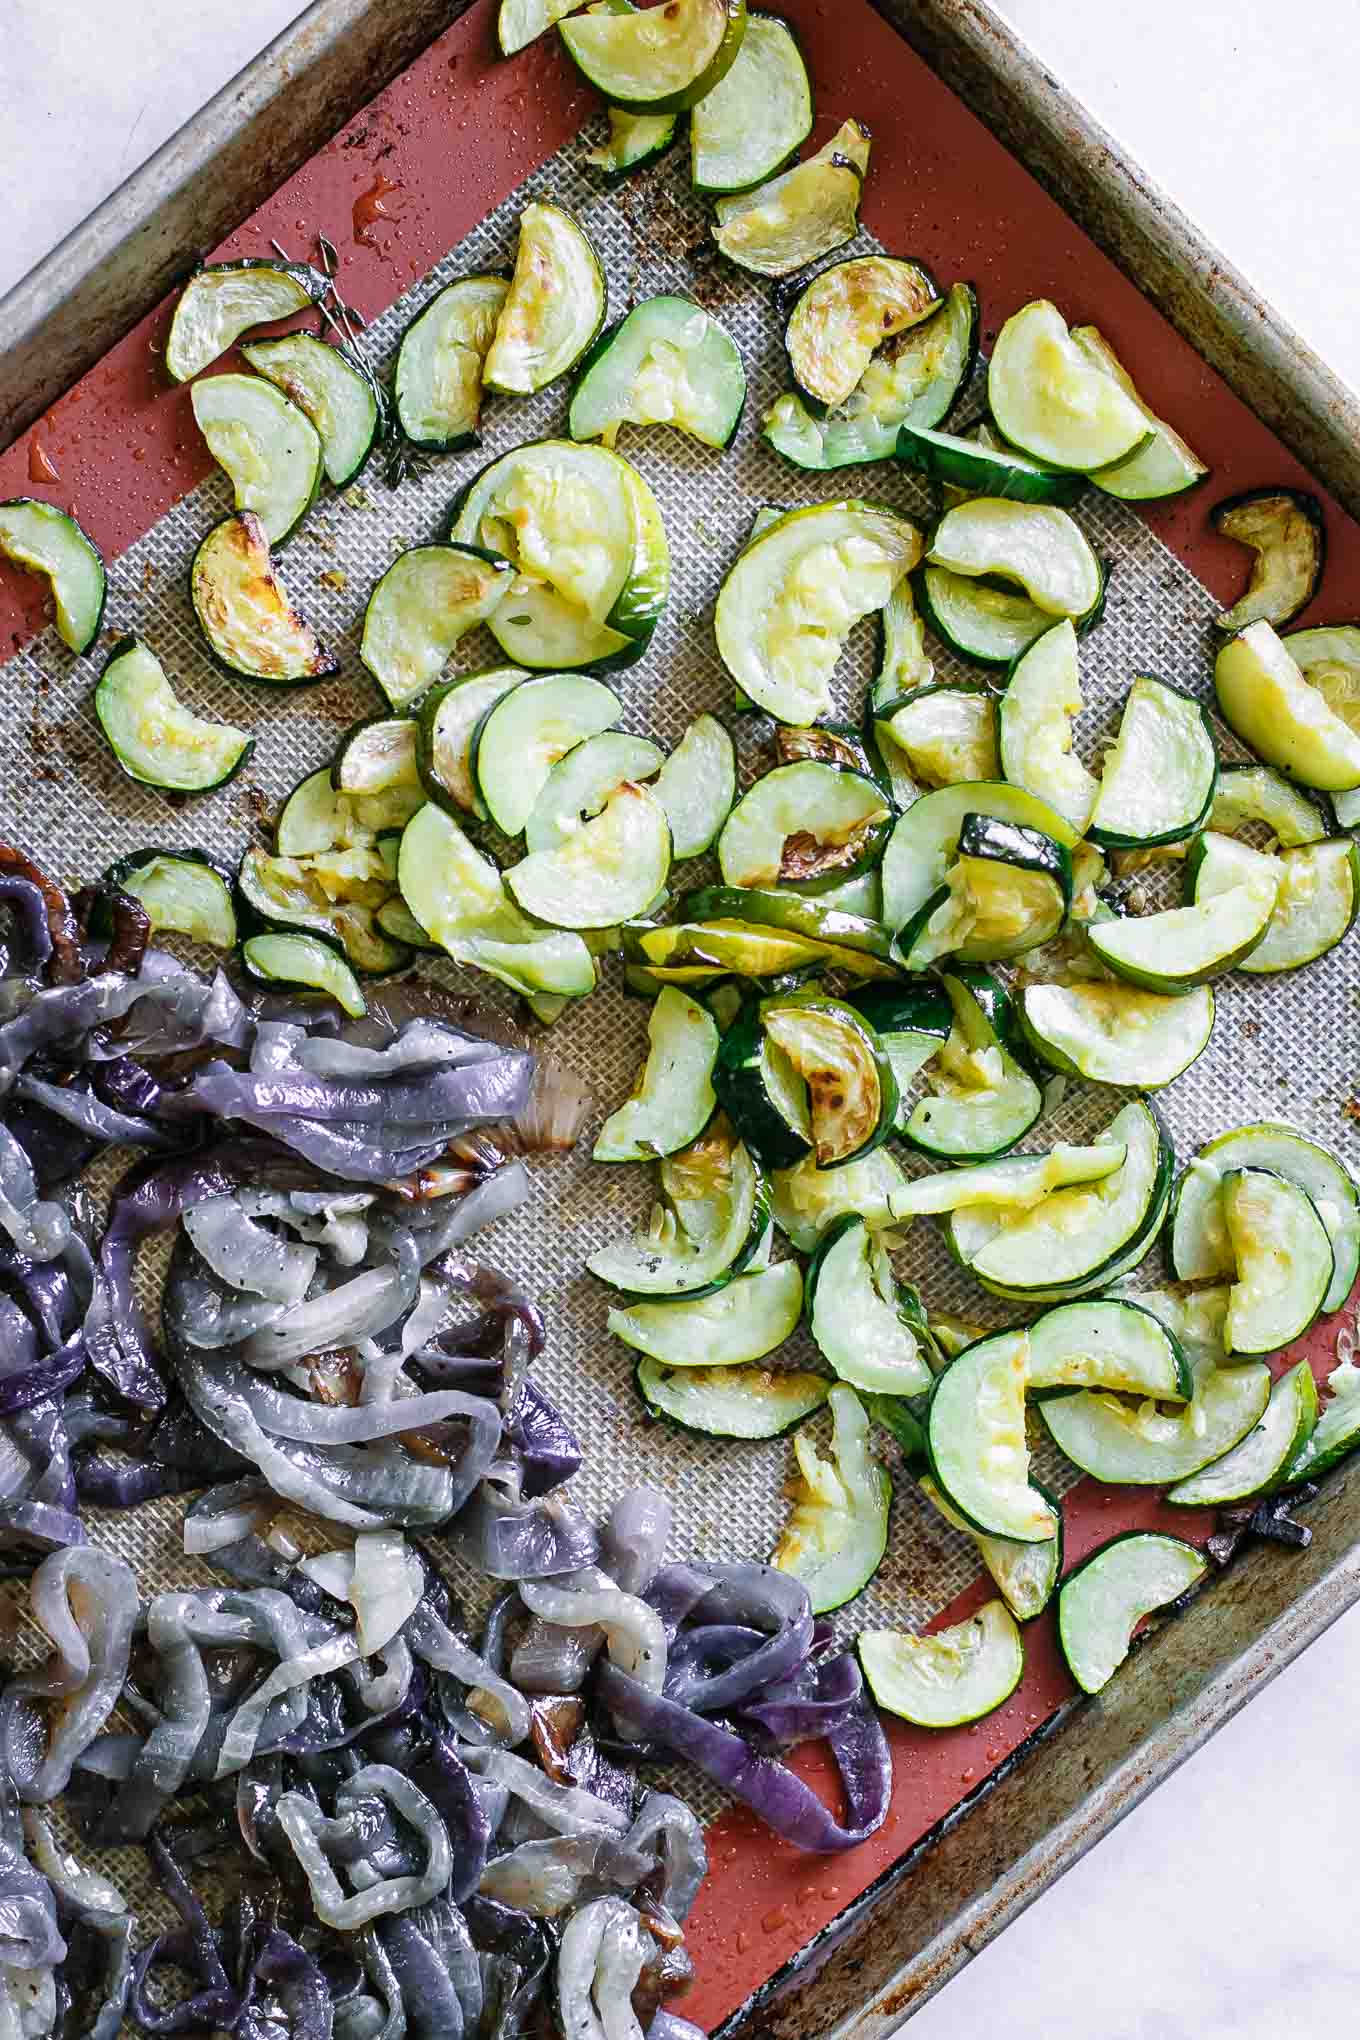 zucchini and onions on a baking sheet after roasting